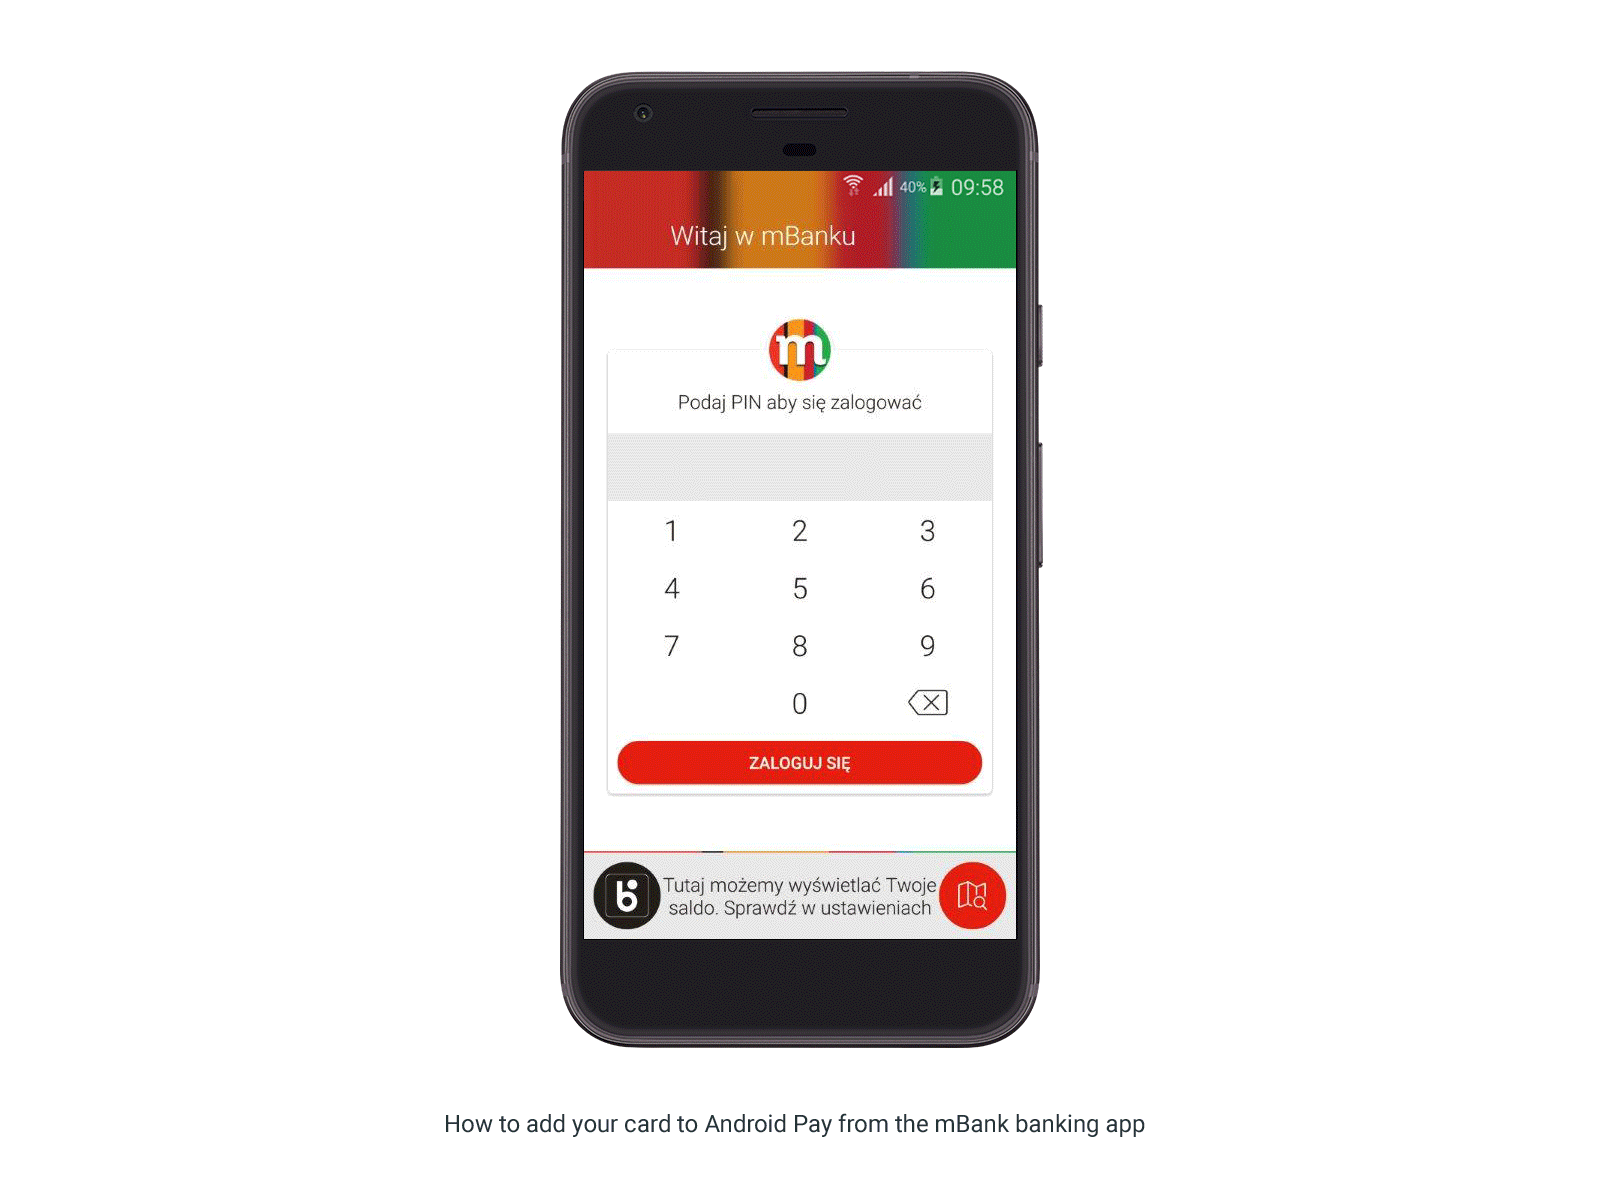 mBank - Android Pay Integration